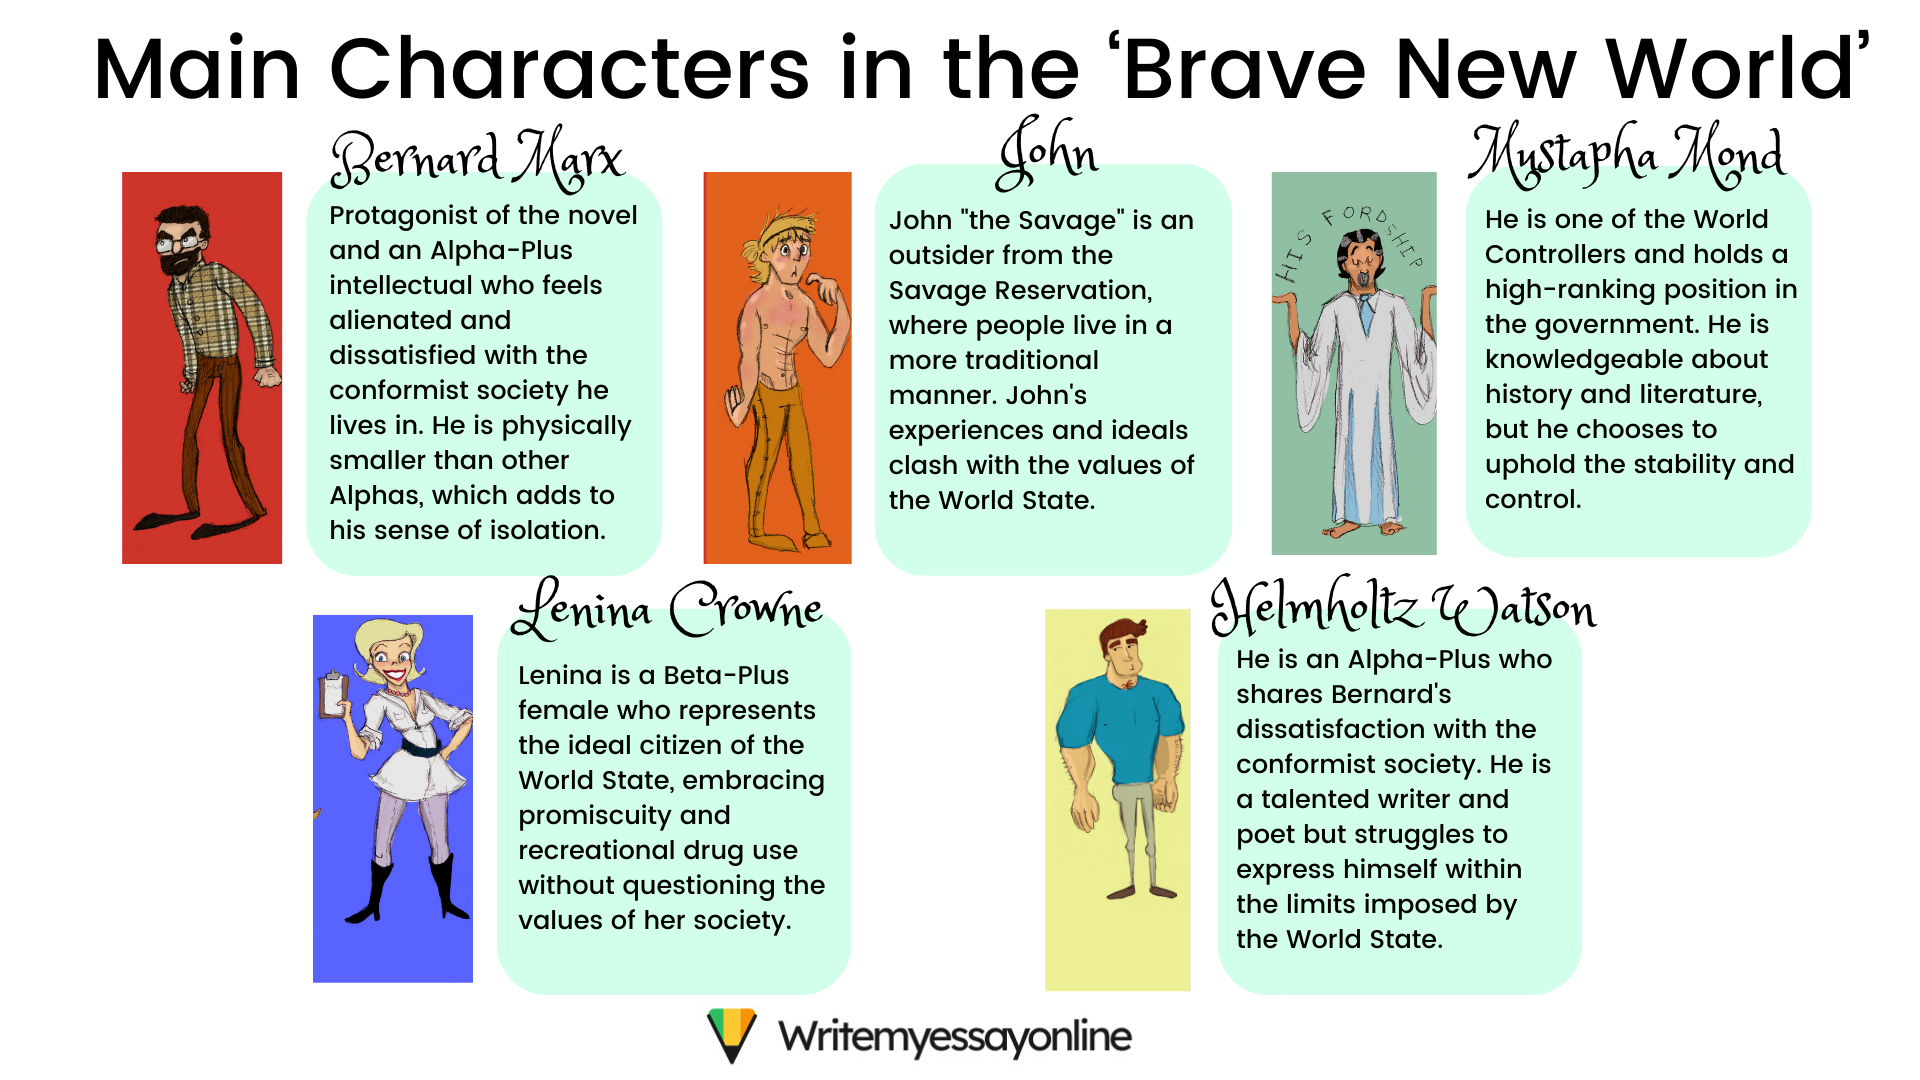 Main Characters in the Brave New World